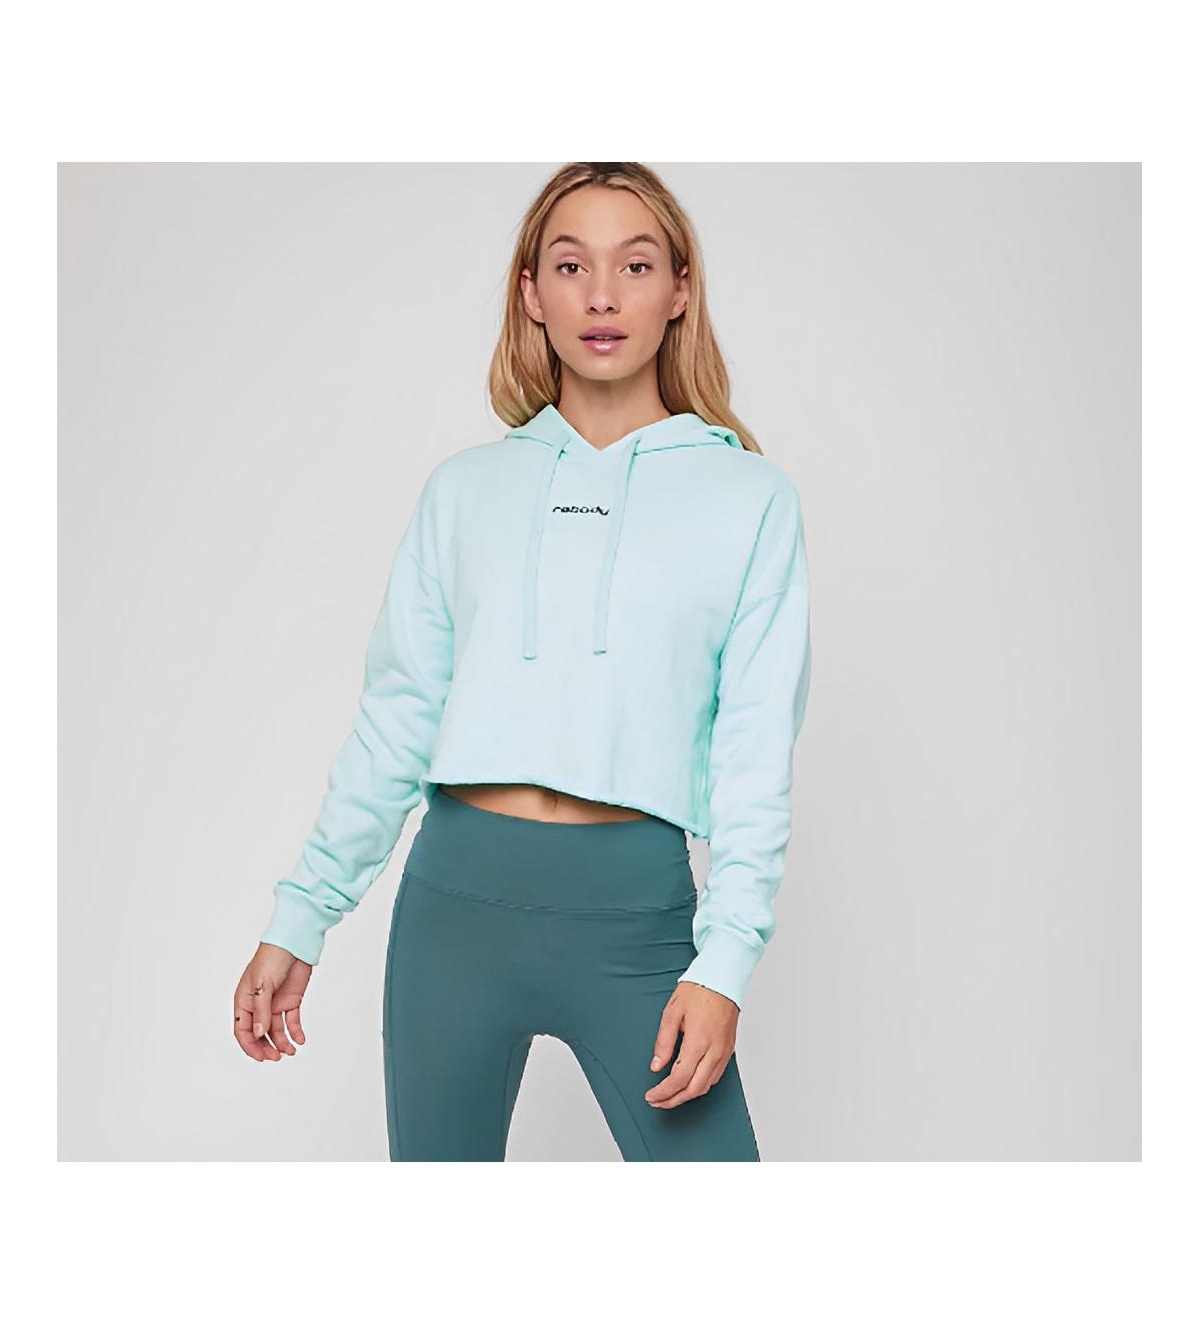 Women's Rebody French Terry Crop Hoody for Women - Smooth mint